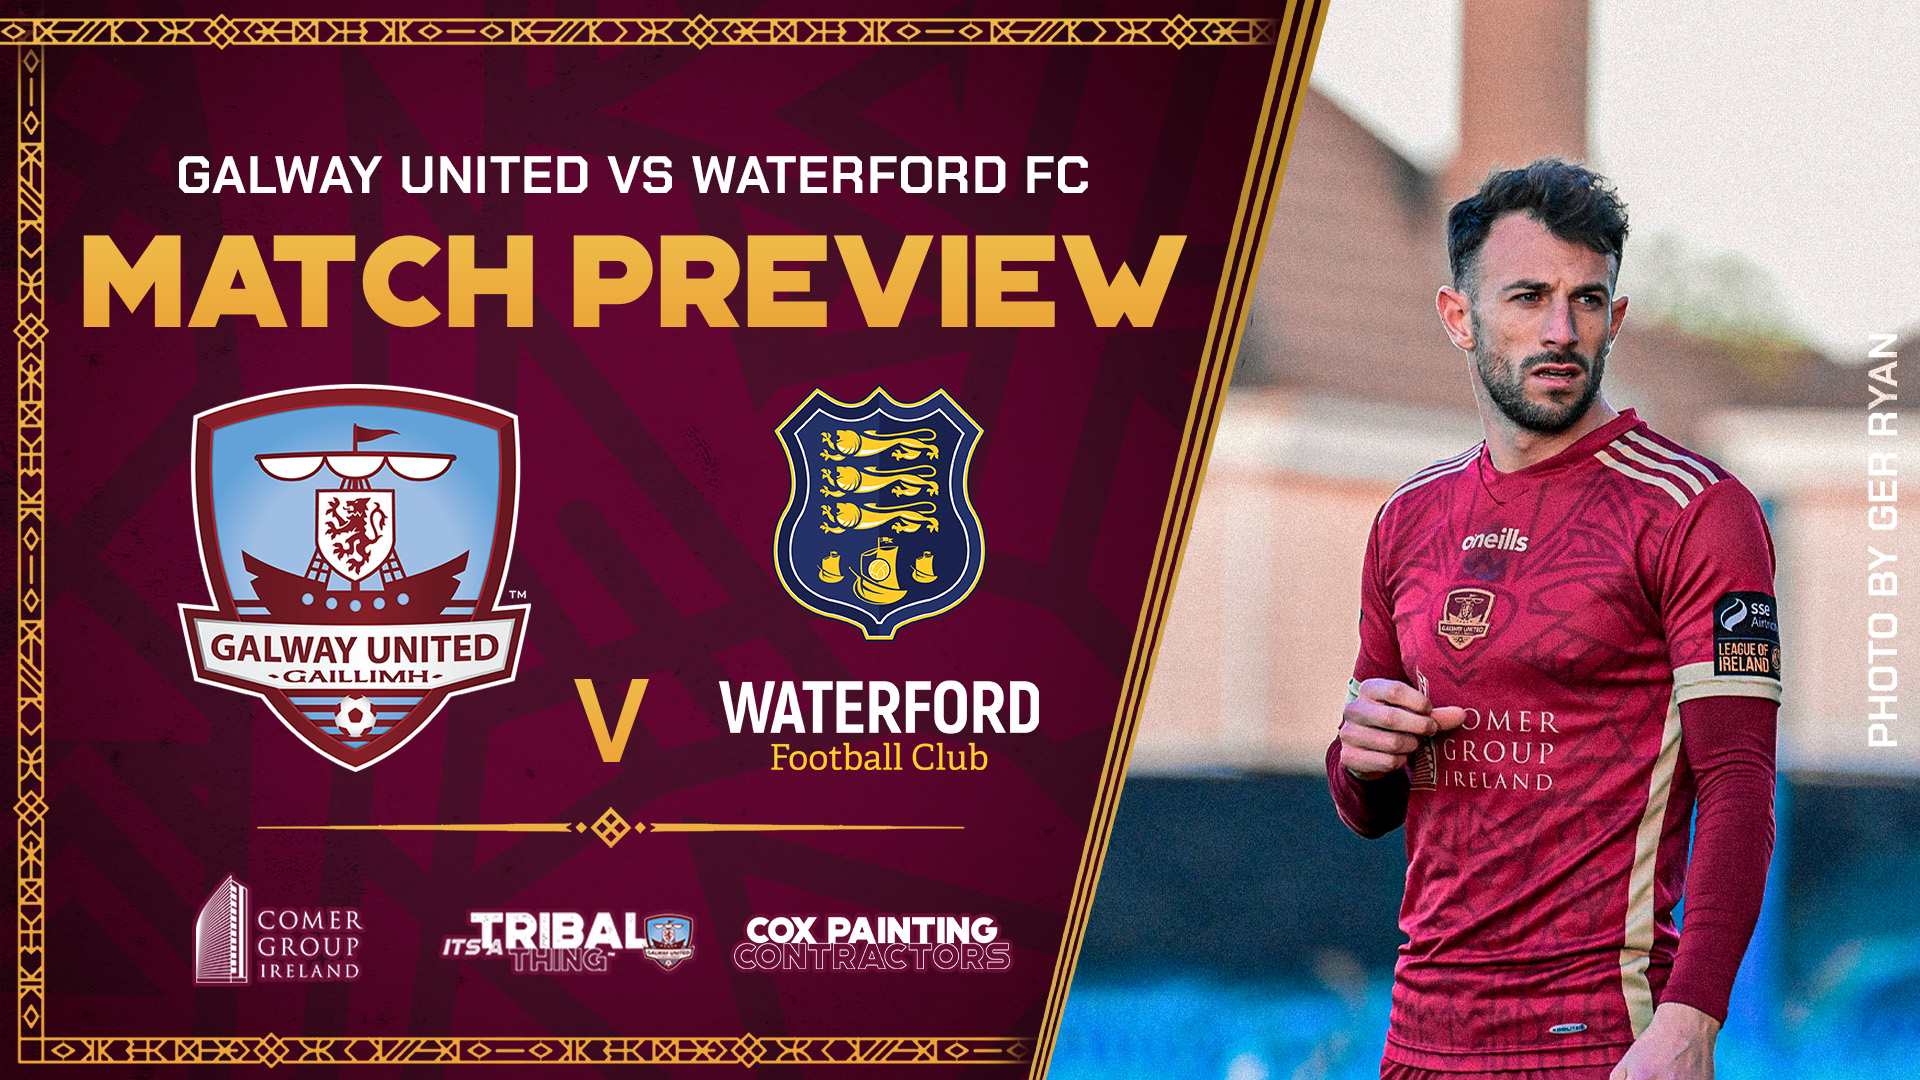 Match Preview | Galway United vs Waterford FC